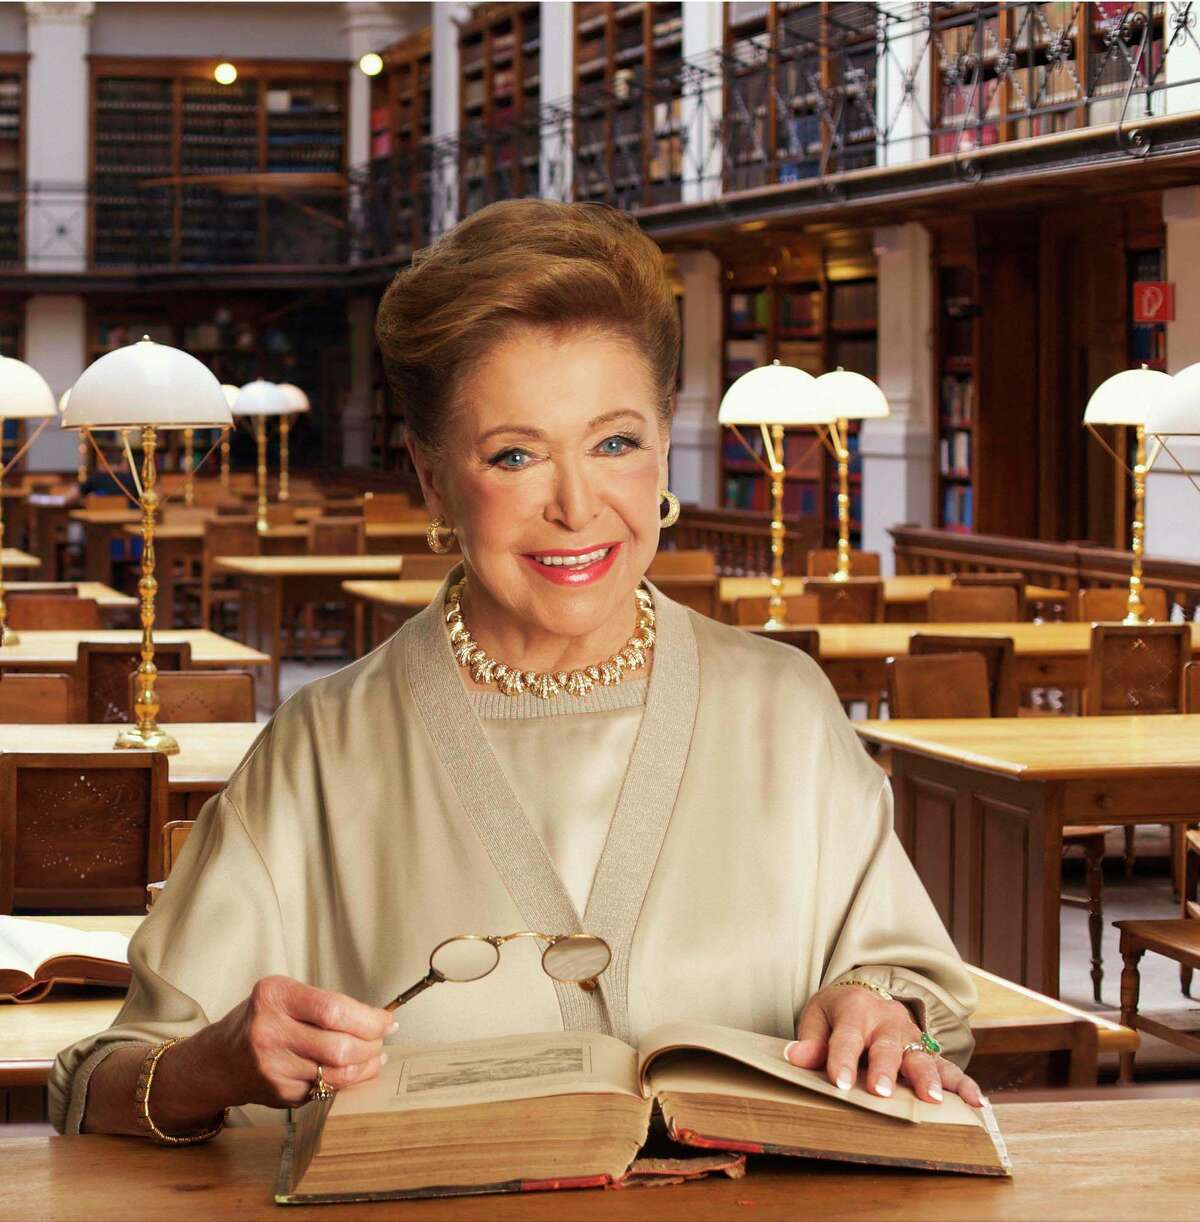 Mary Higgins Clark will speak about her latest novel, "The Lost Years," at a luncheon in Danbury June 6. Must credit: Bernard Vidal